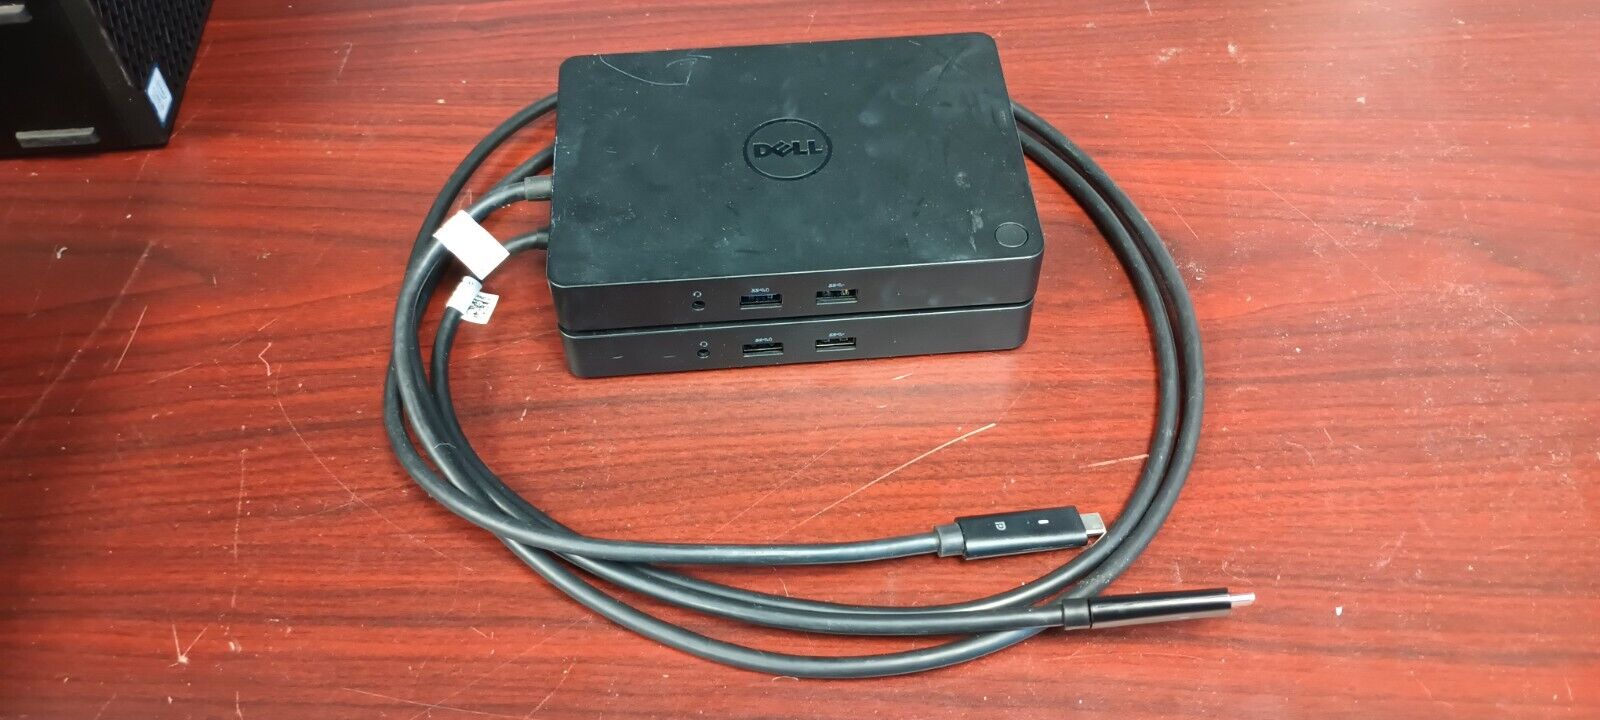 Pair of 2) K17A WD15 USB-C Docking Station K17A001 NO AC ADAPTER *TESTED* #95